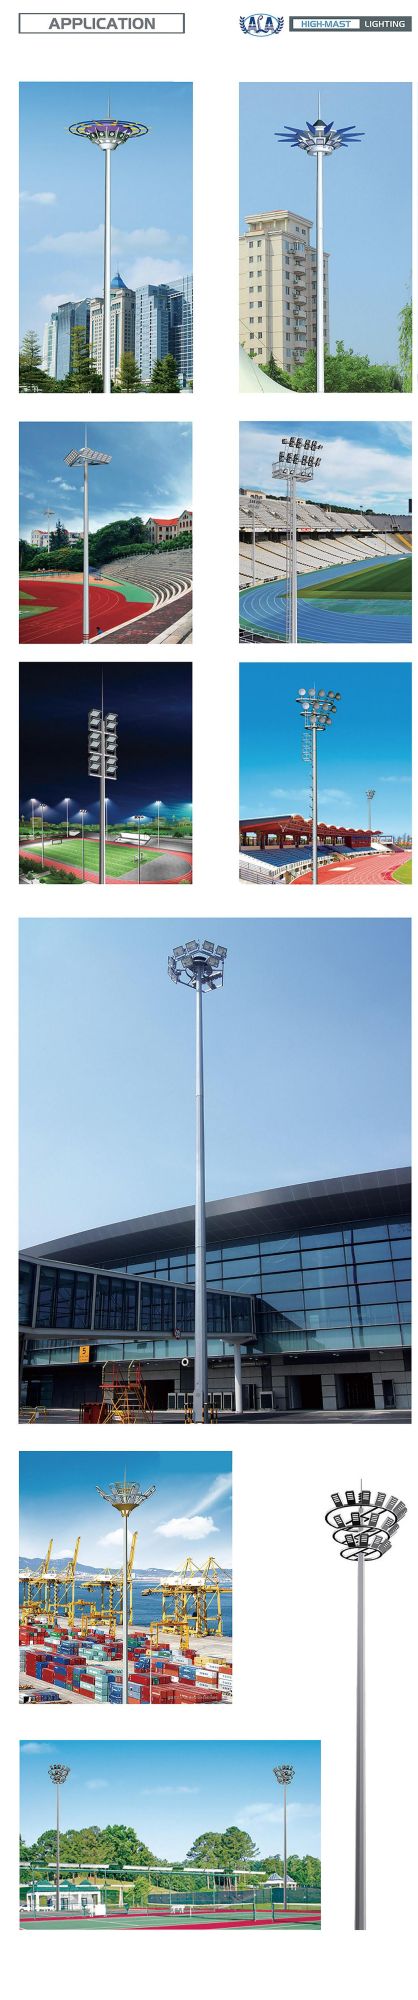 Ala Newest 500W-1000W CE Certified Flood LED Lamp High Mast Light Applicable to City Square, Station, Wharf, Highway, Stadium, Overpass